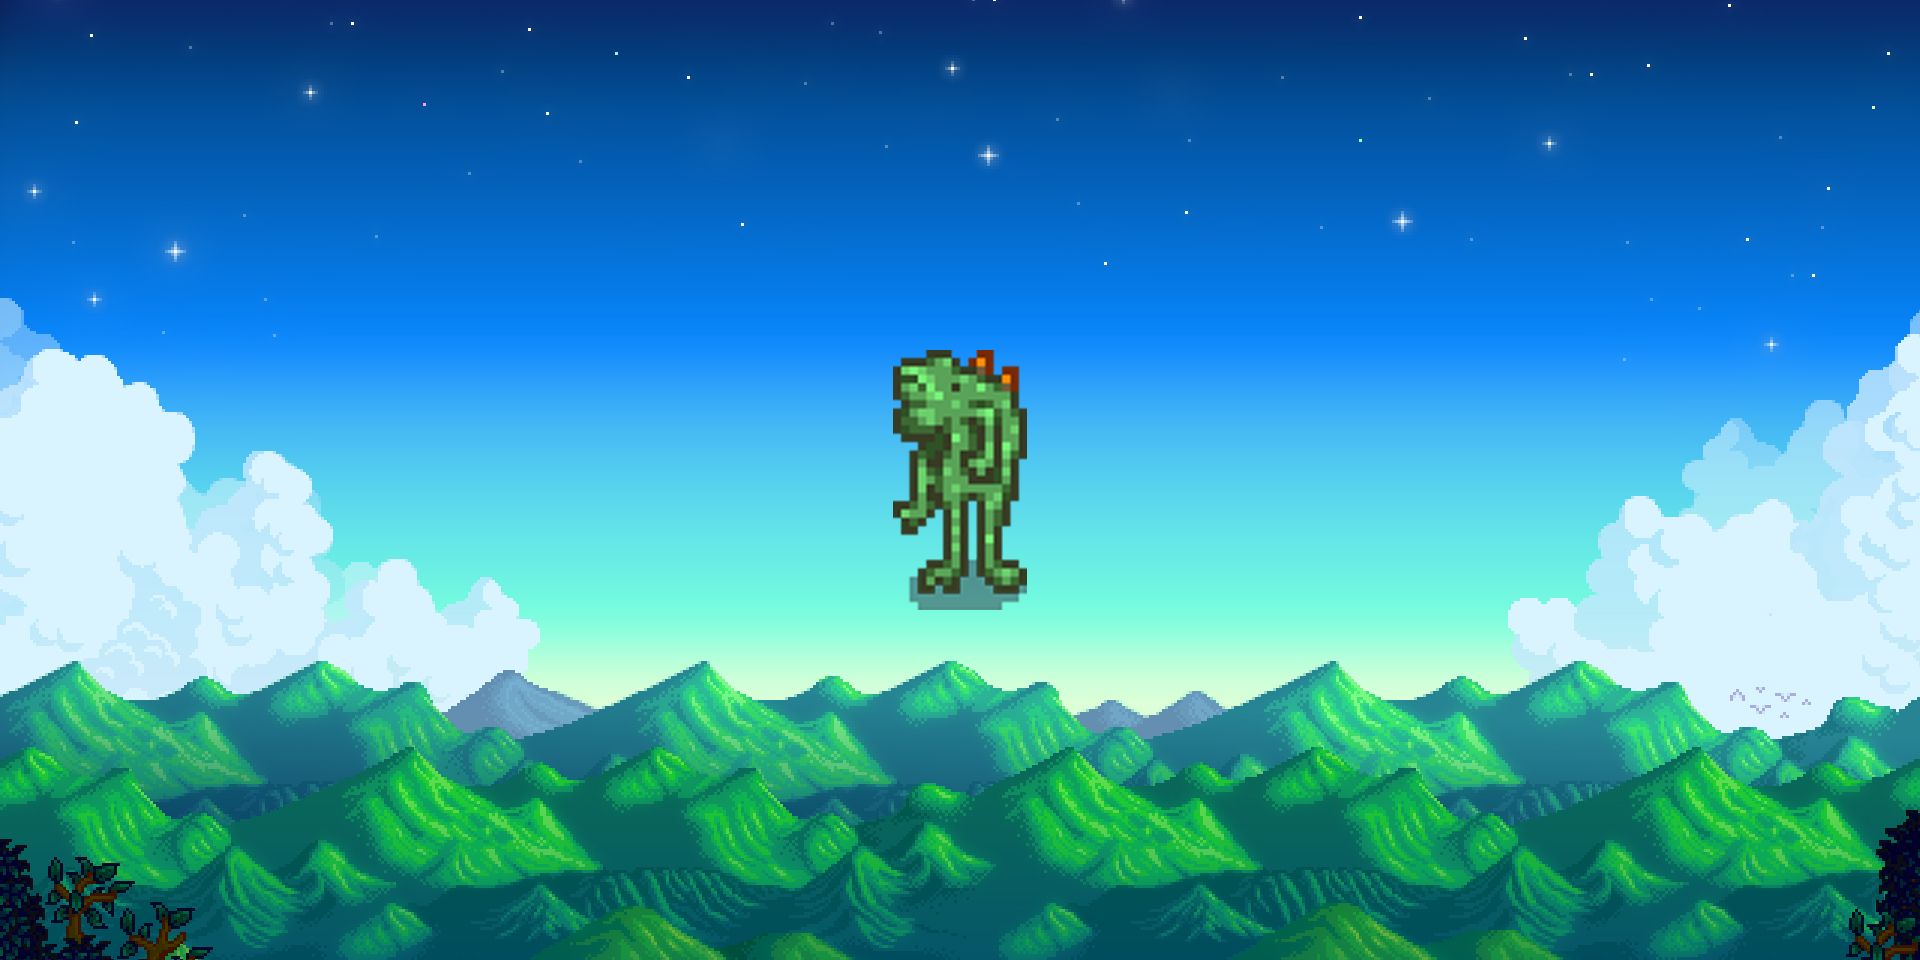 Stardew Valley Foroguemon Statue on the background of the mountain